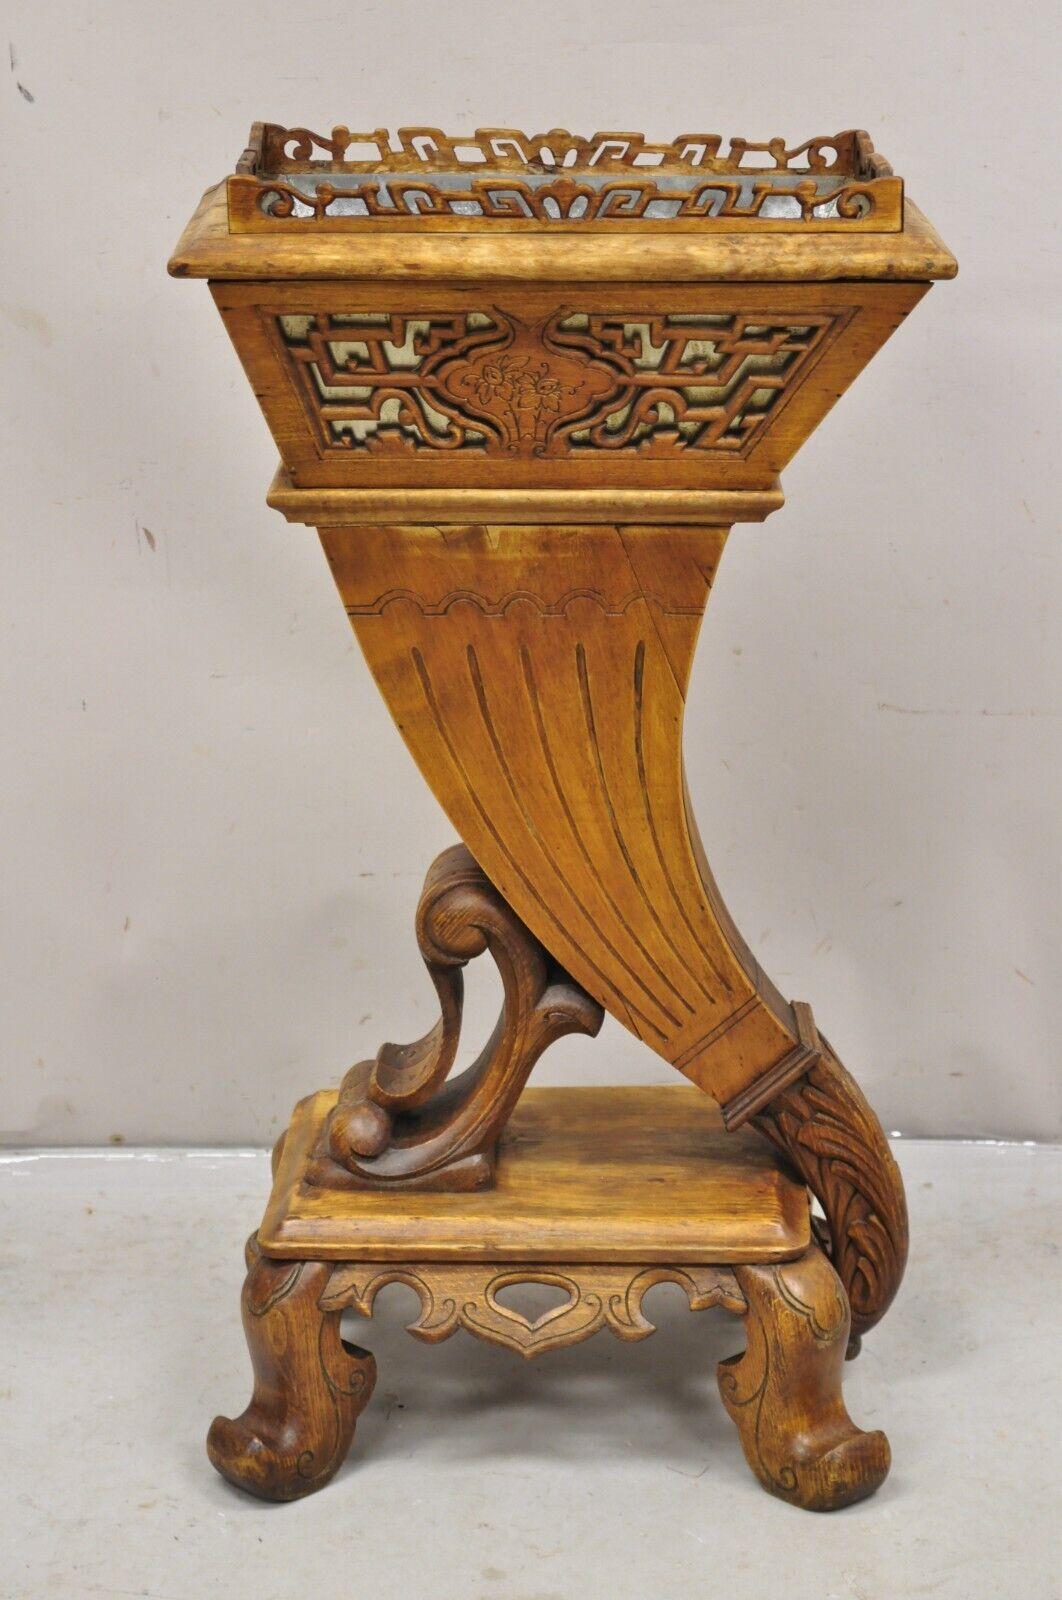 Vintage Carved Teak Wood Fretwork Figural Cornucopia Chinese Plant Stand Planter with Zinc Metal Liner. Circa Mid to Late 20th Century. Measurements: 35.5